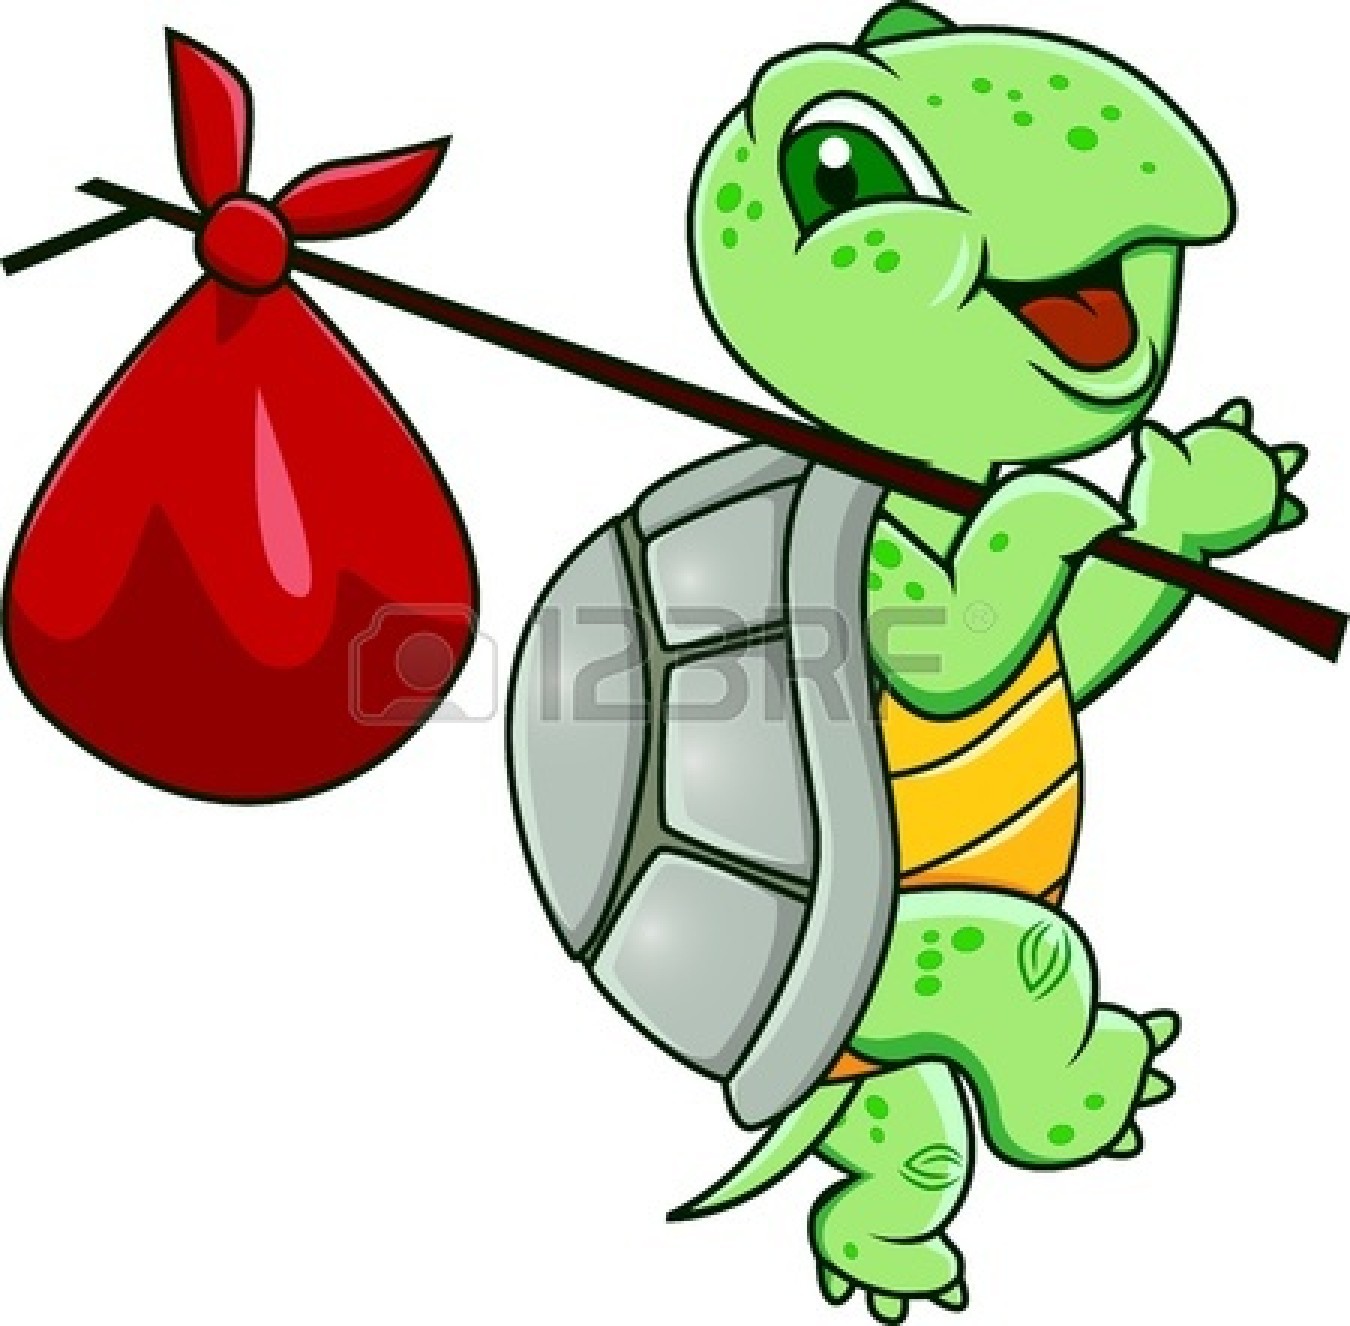 Turtle Clipart, Download Free Clip Art on Clipart Bay.